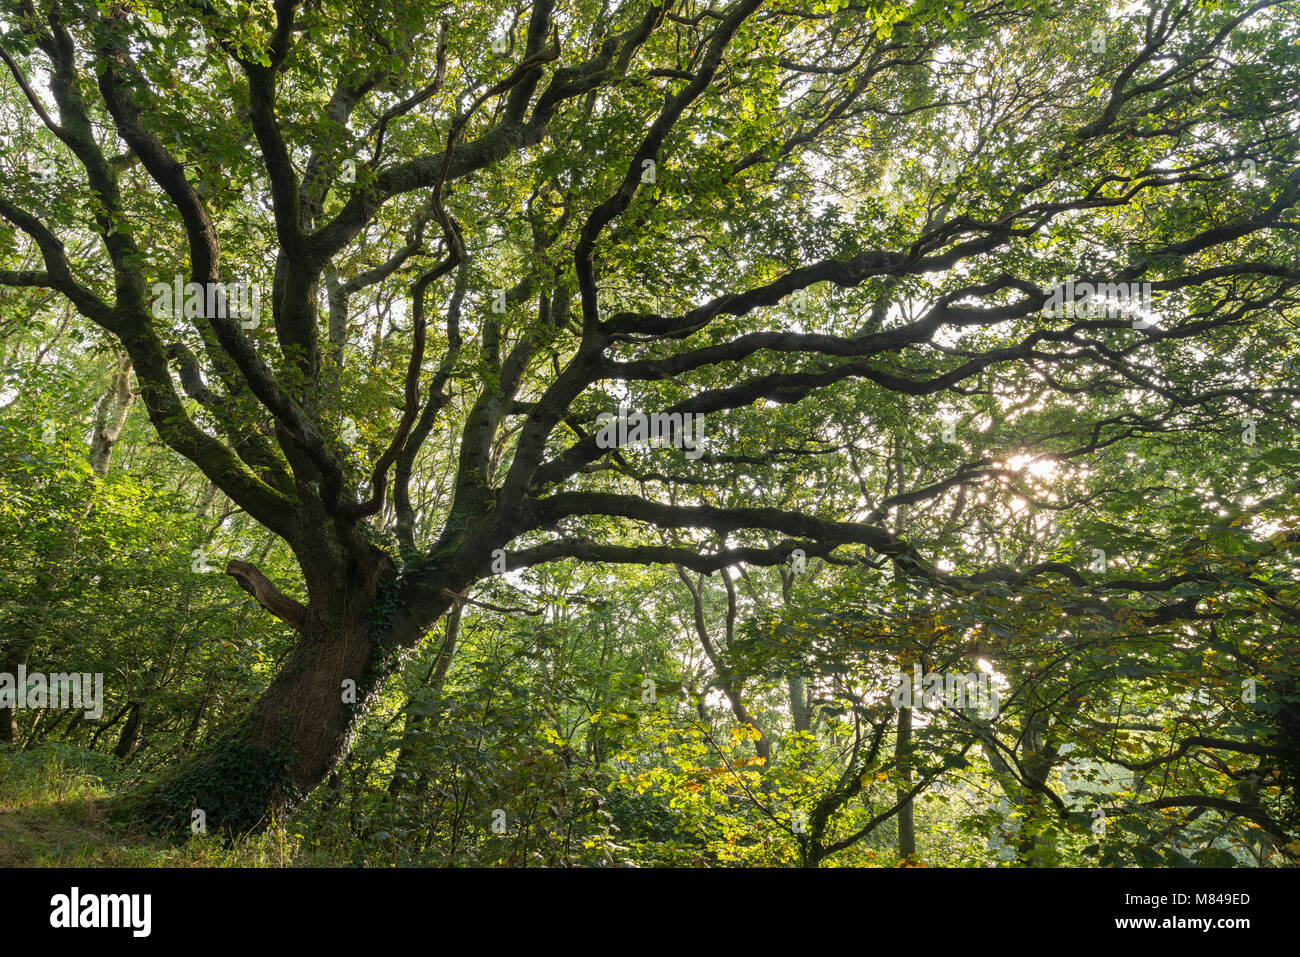 Oak tree with spreading branches in summertime, Cornwall, England. Summer (August) 2017. Stock Photo